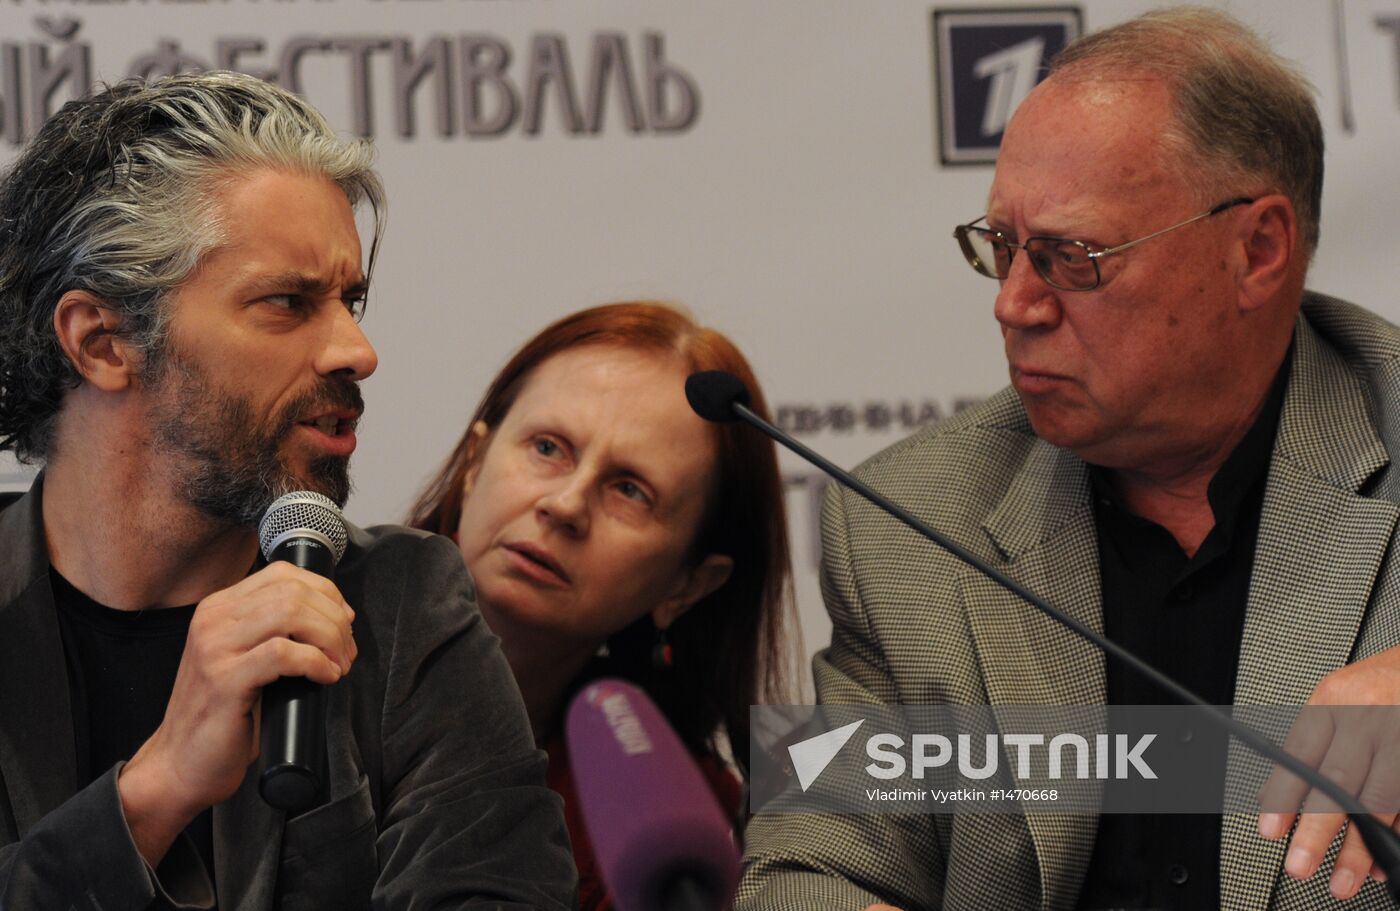 News conference on opening of XI Chekhov Festival